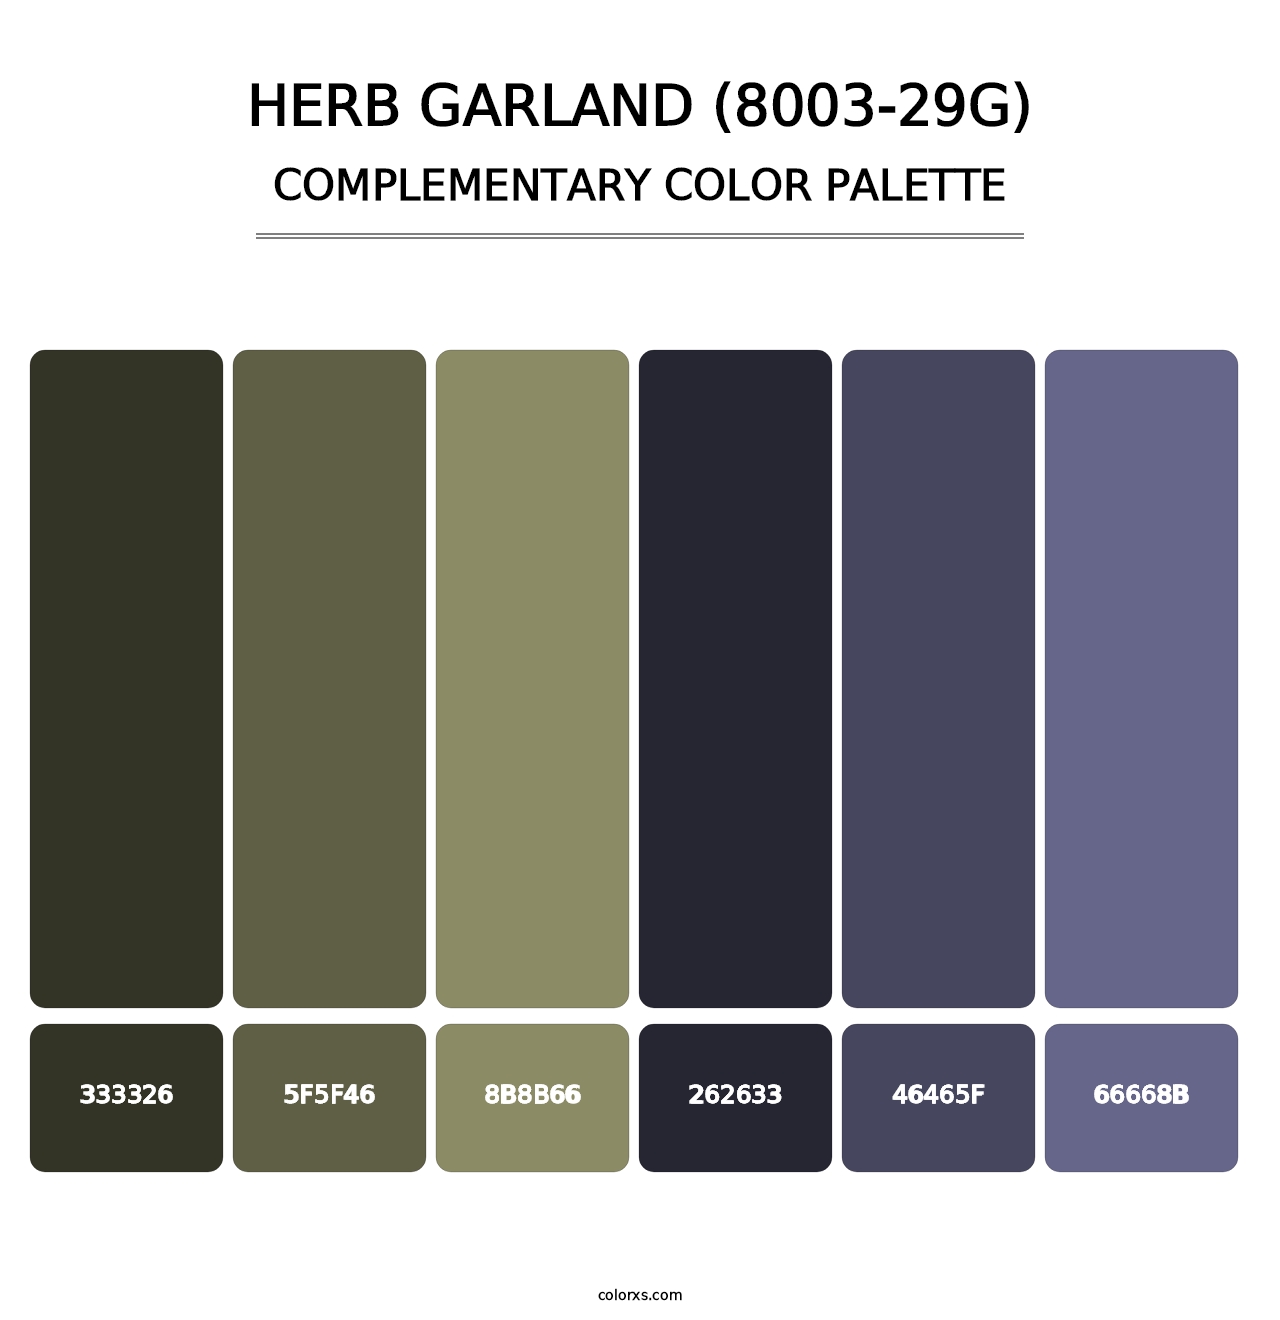 Herb Garland (8003-29G) - Complementary Color Palette